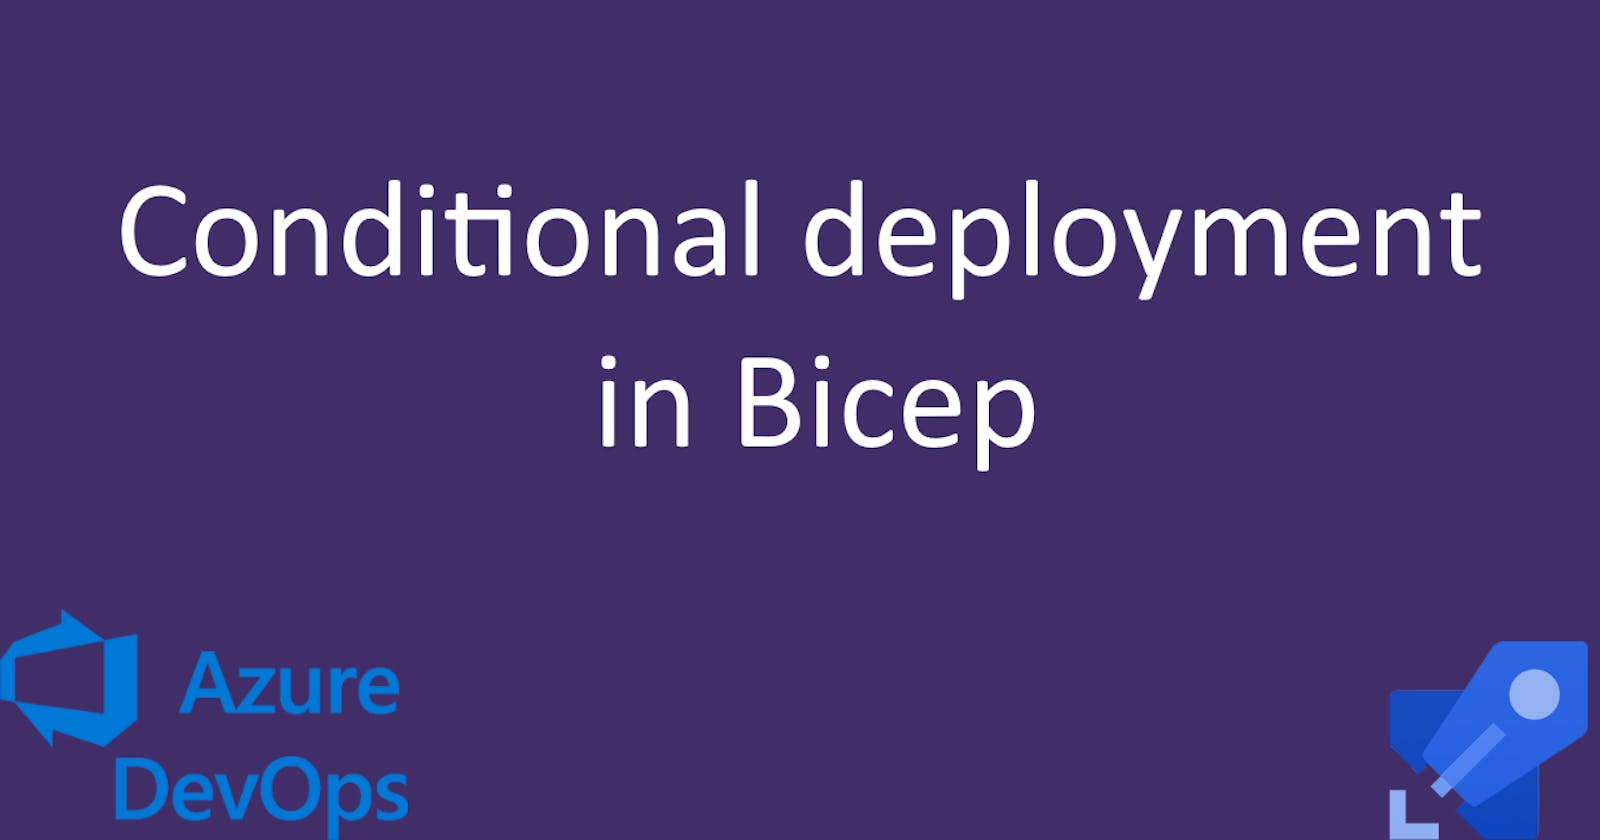 Conditional deployment in Bicep